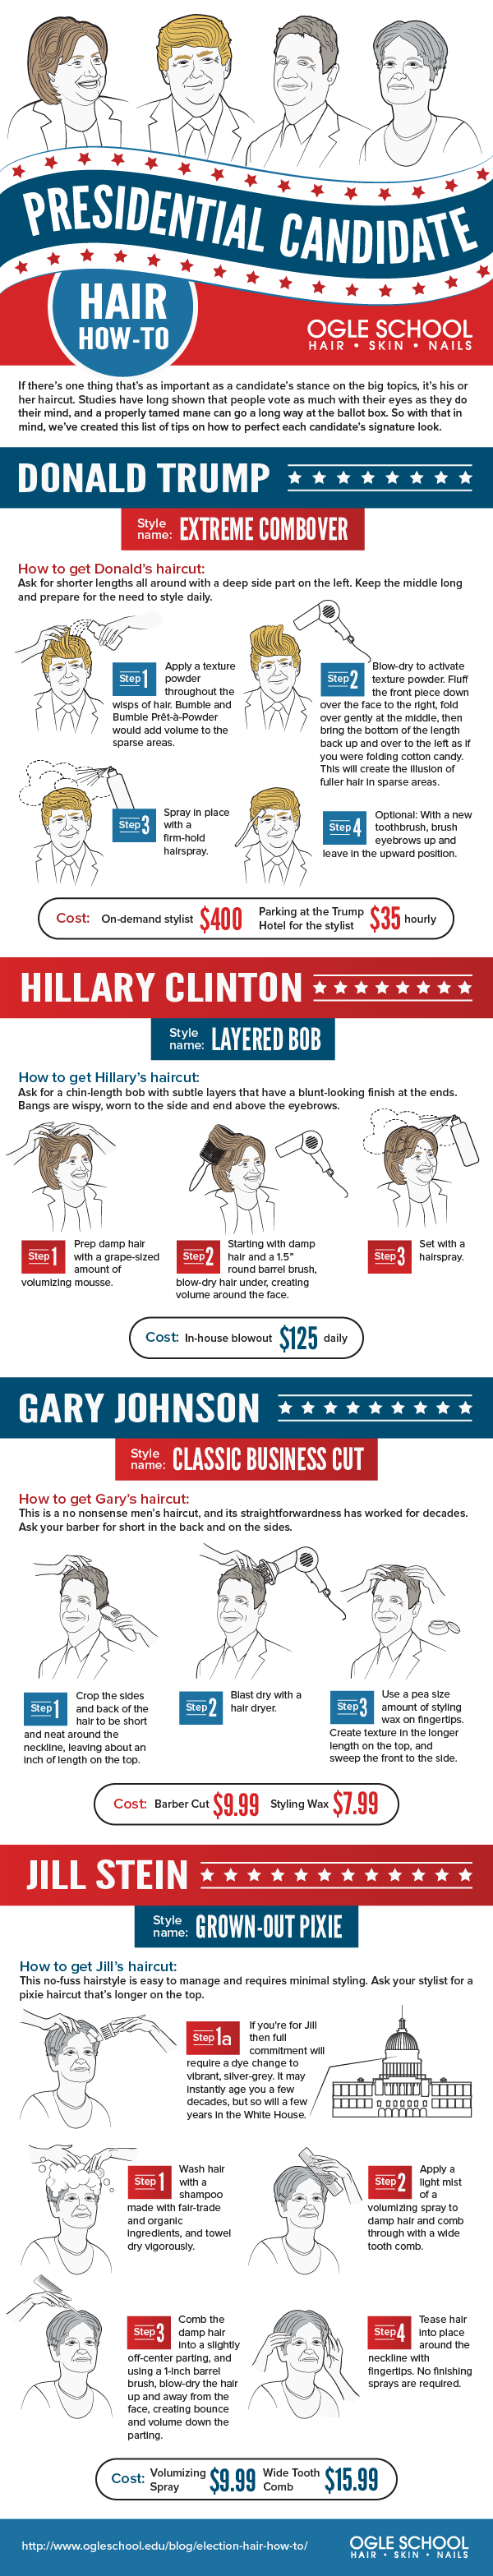 election-hair-how-to-ig2